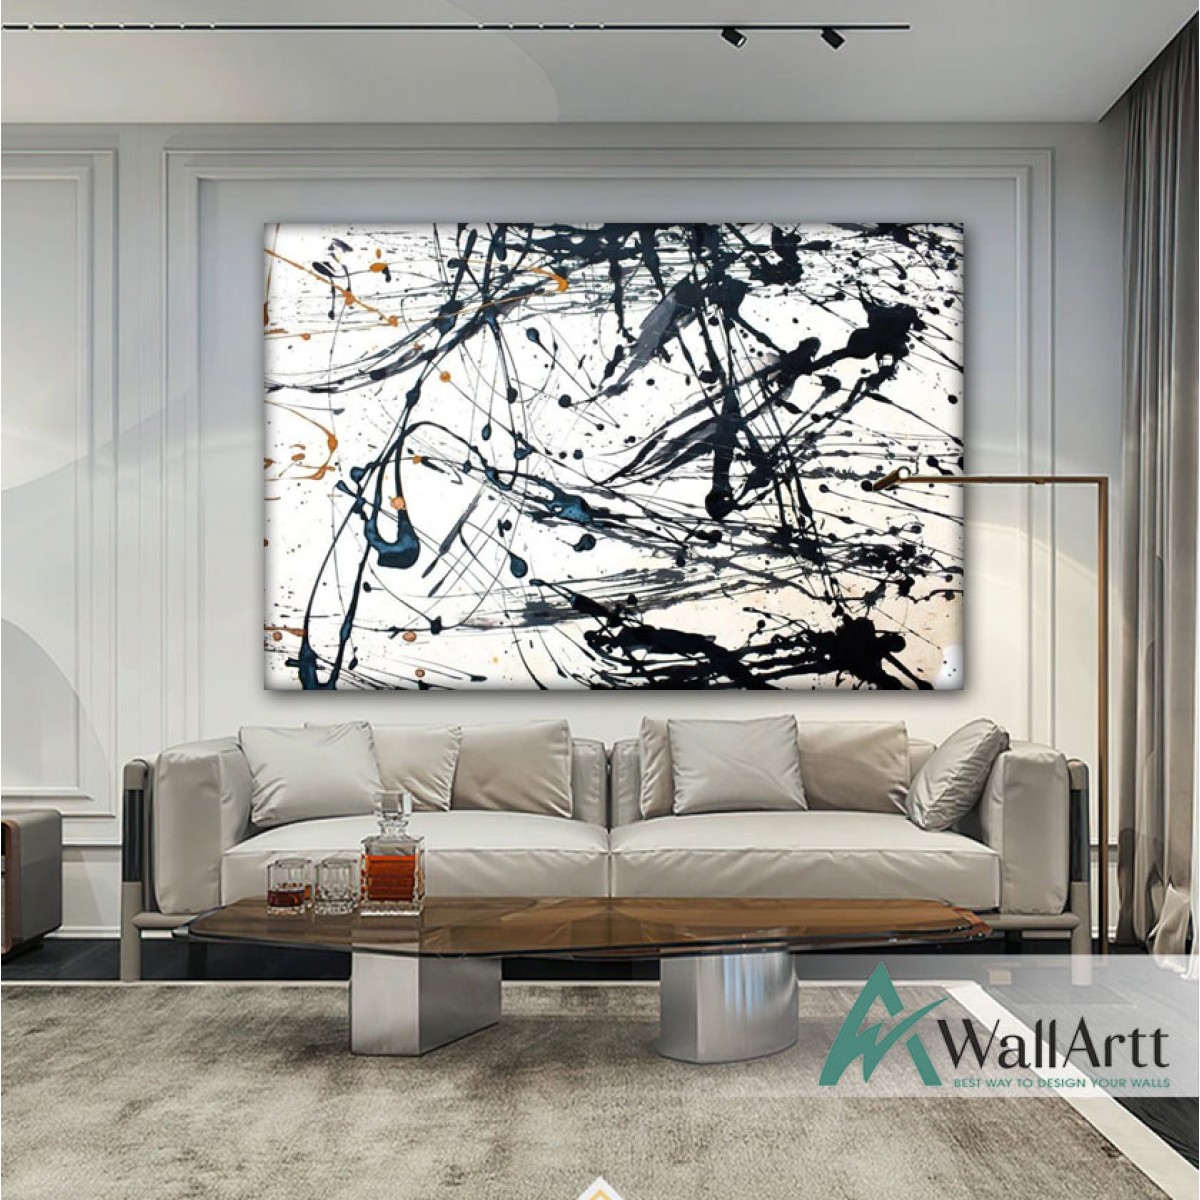 Abstract Black Drawings Textured Partial Oil Painting